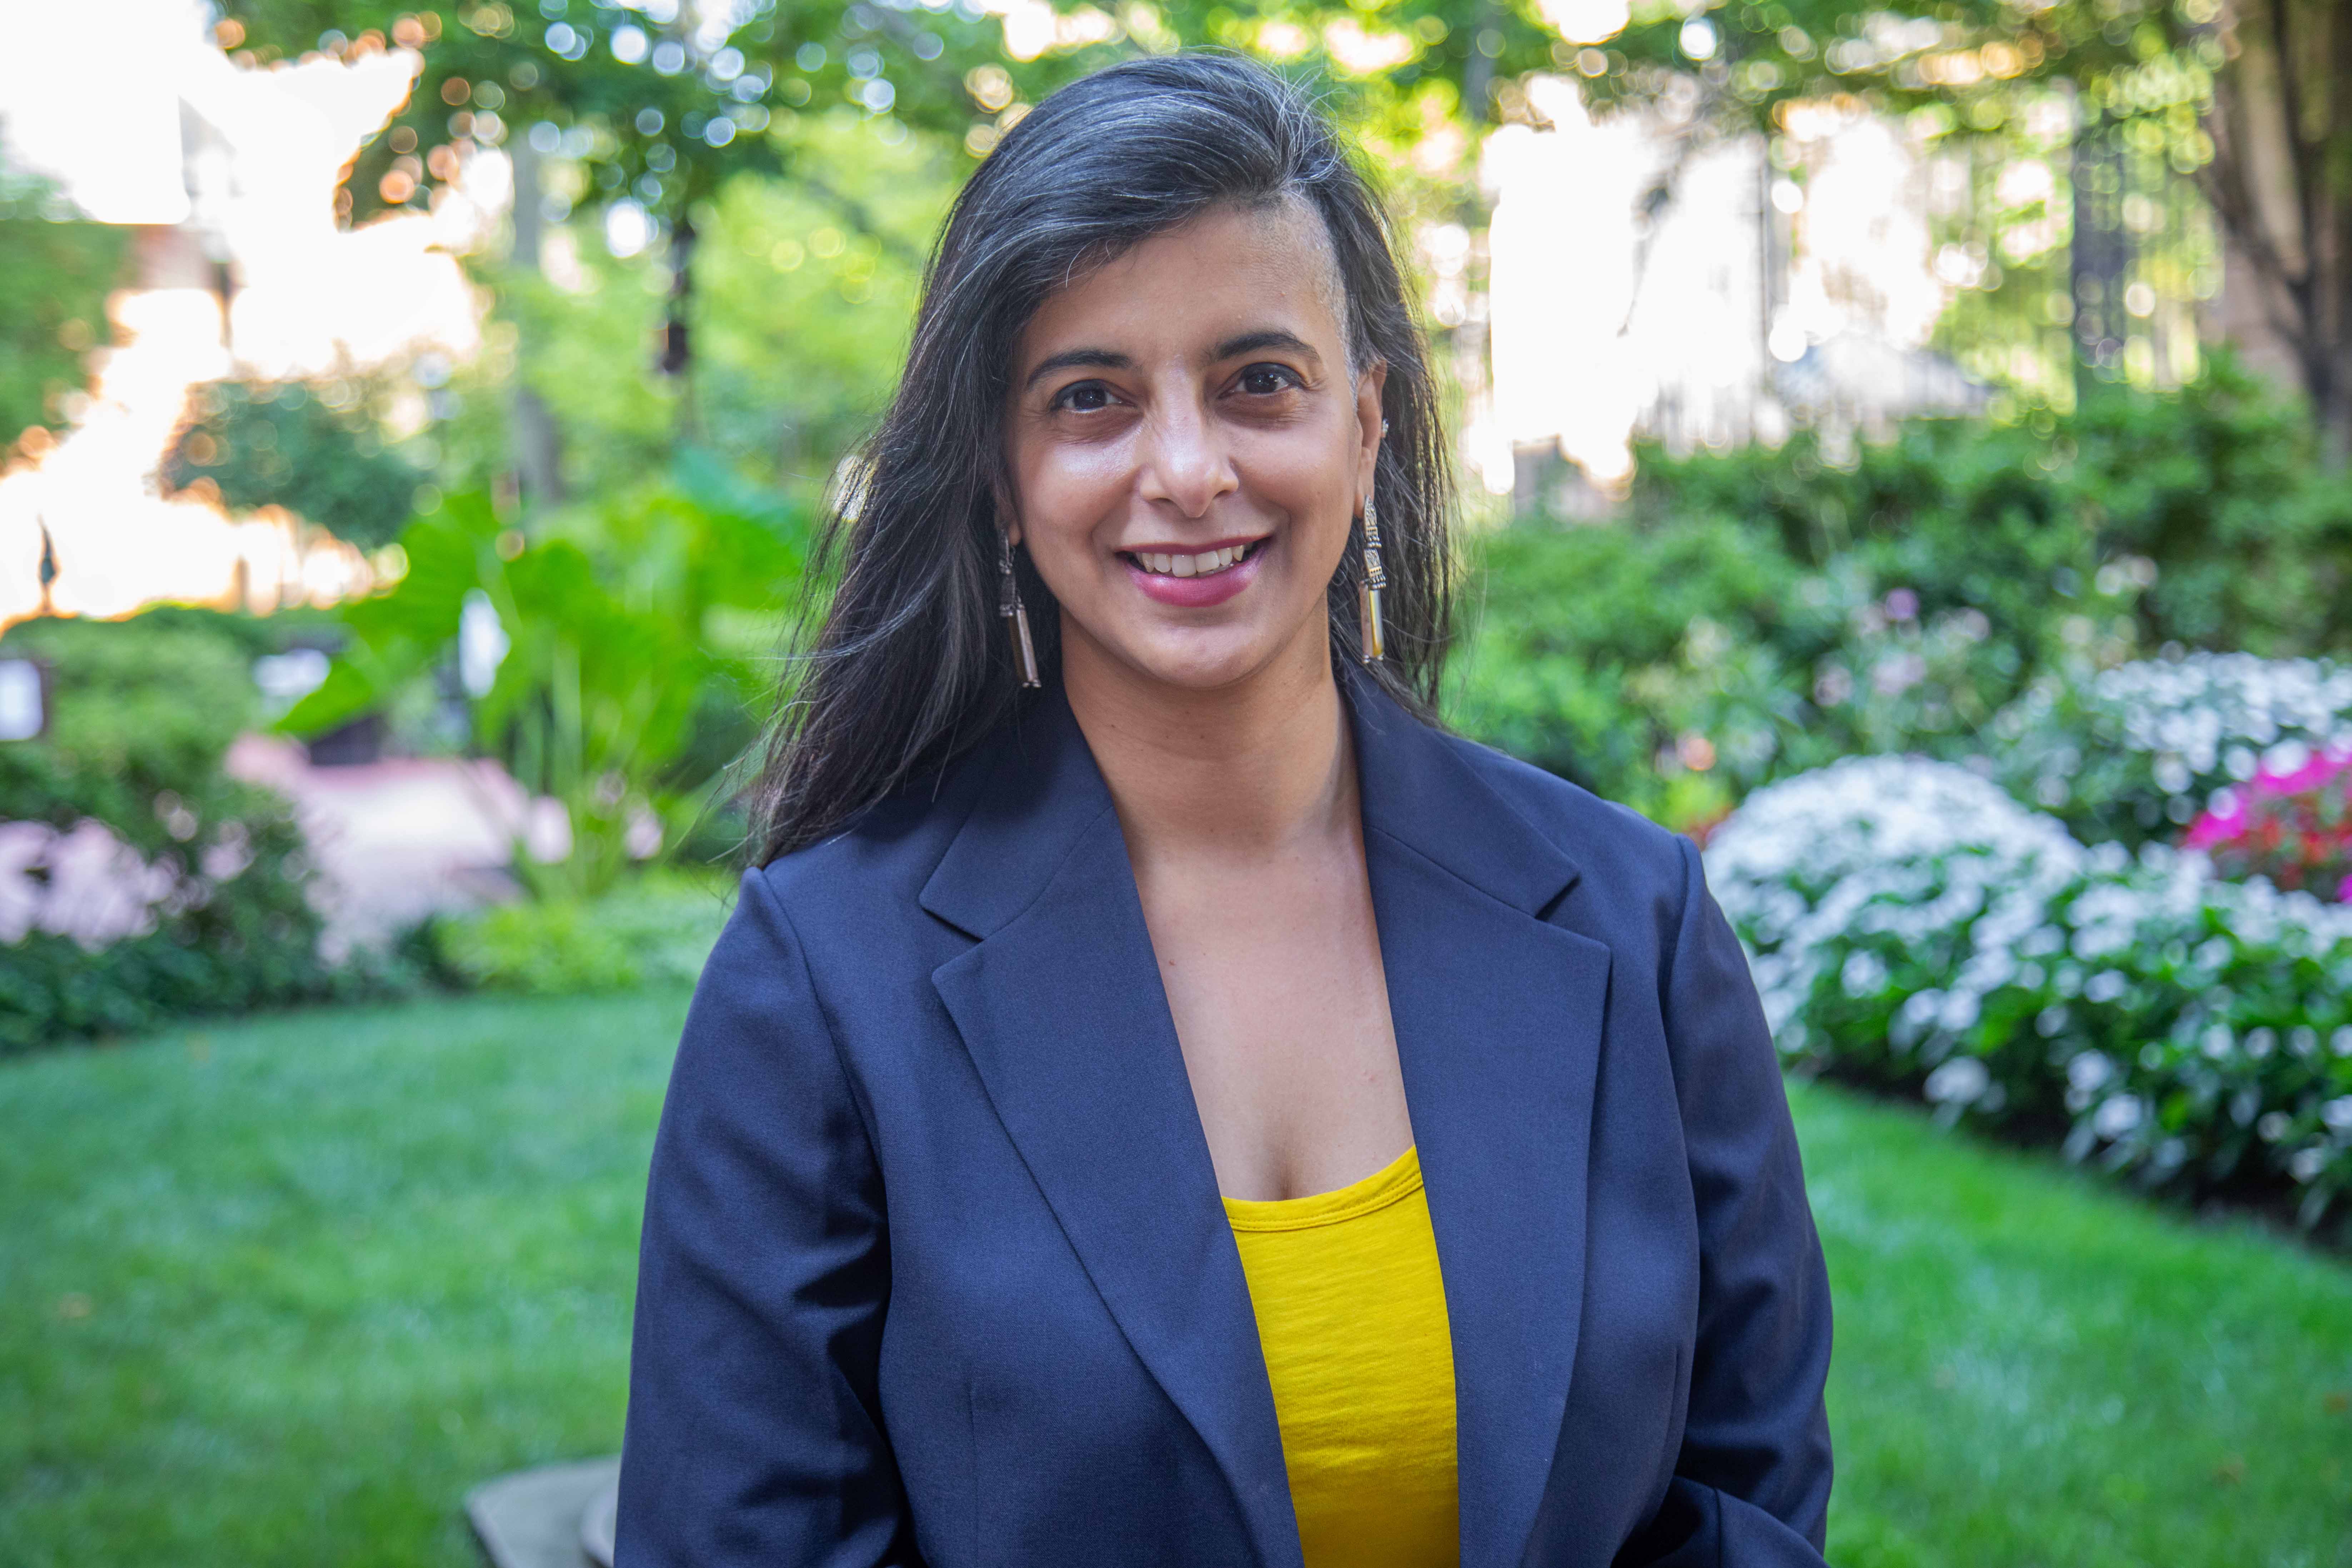 Shayoni Mitra headshot. She is wearing a yellow shirt and black blazer. Campus greenery is behind her